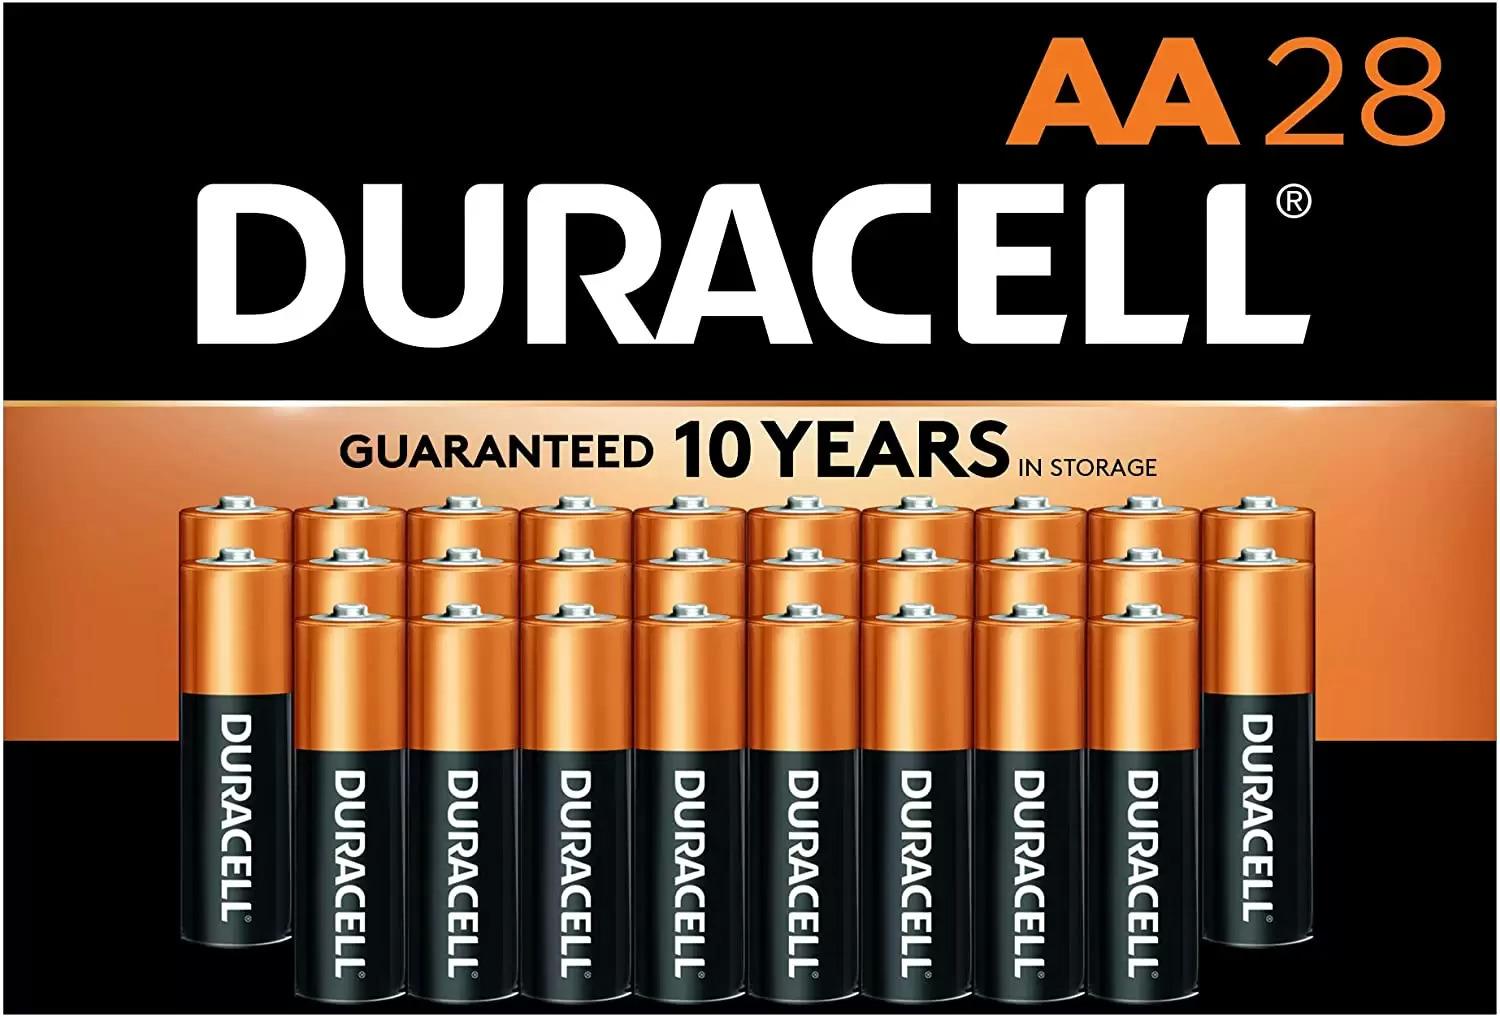 28 Duracell CopperTop AA Alkaline Batteries for $9.20 Shipped